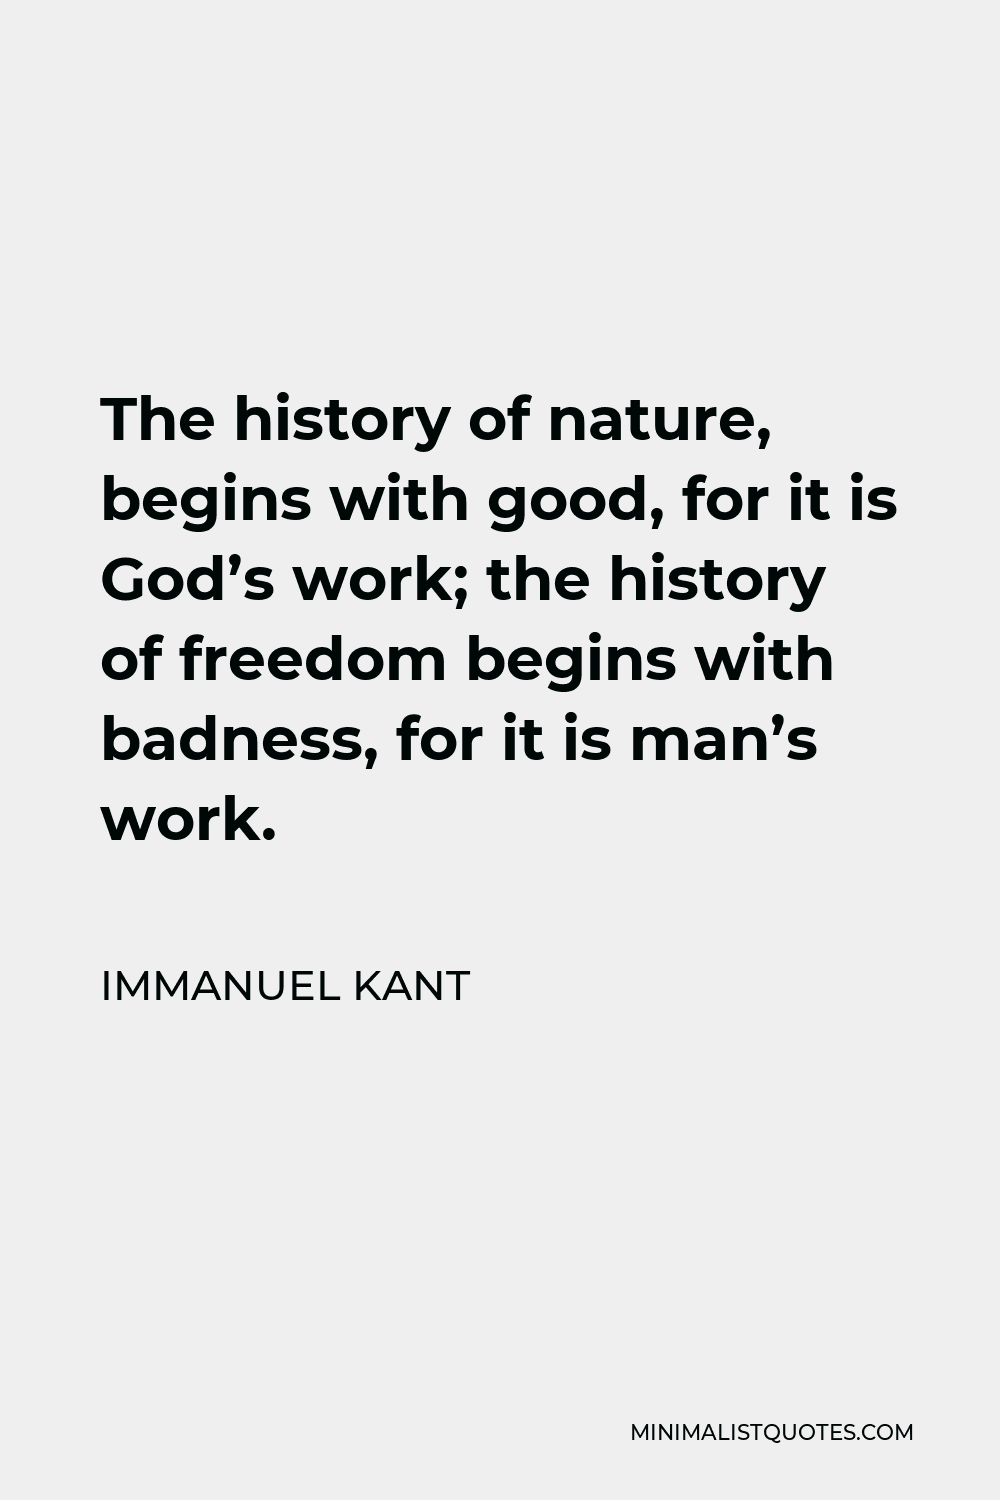 Immanuel Kant Quote: The history of nature, begins with good, for it God's work; the history of freedom begins with badness, for it is man's work.